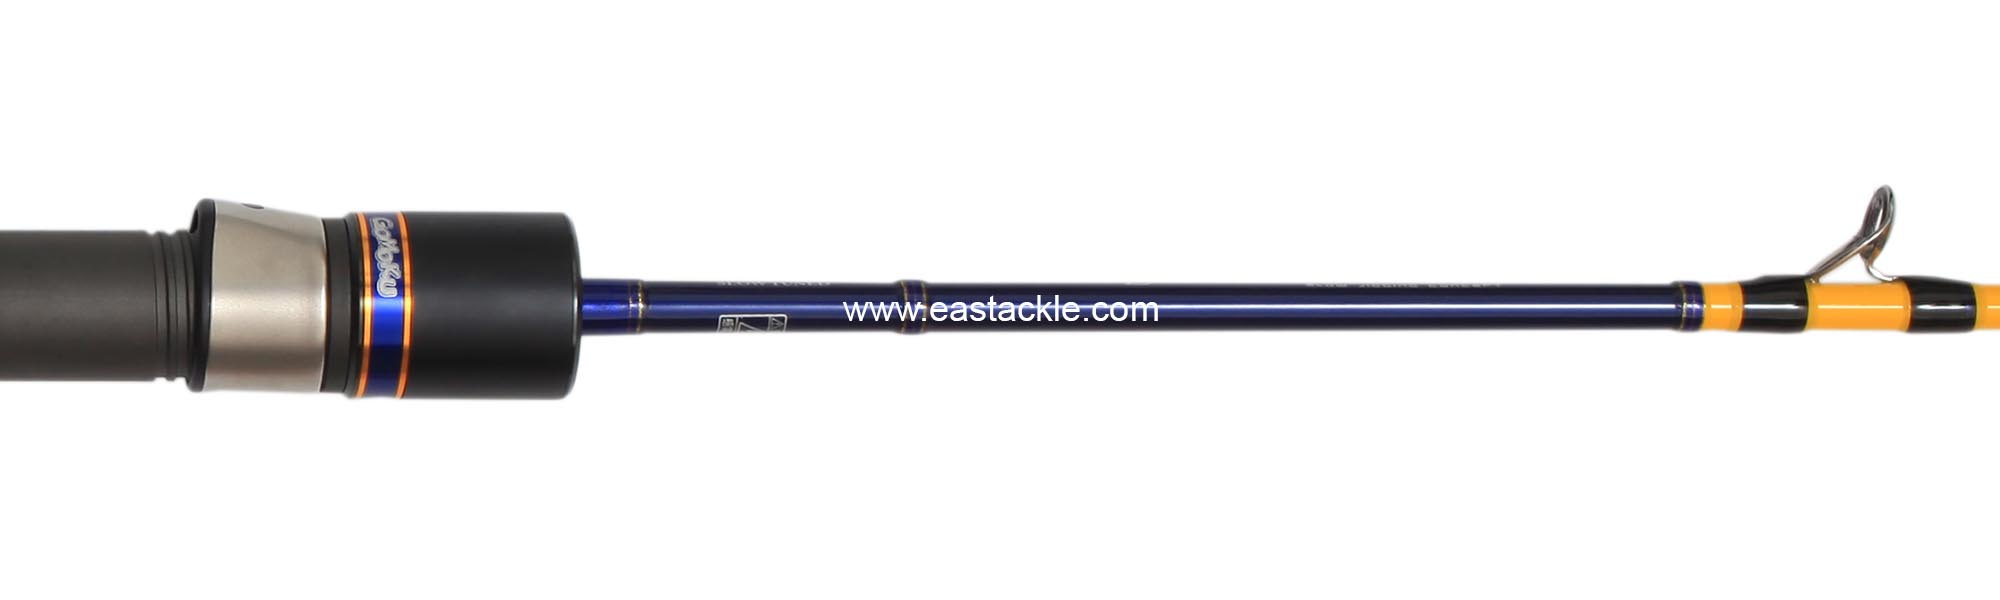 Storm - Gomoku Slo4 Evolution - SFV631-3 - Overhead Slow Fall Jigging Rod - Fore Grip to Stripper Guide Section (Side View)